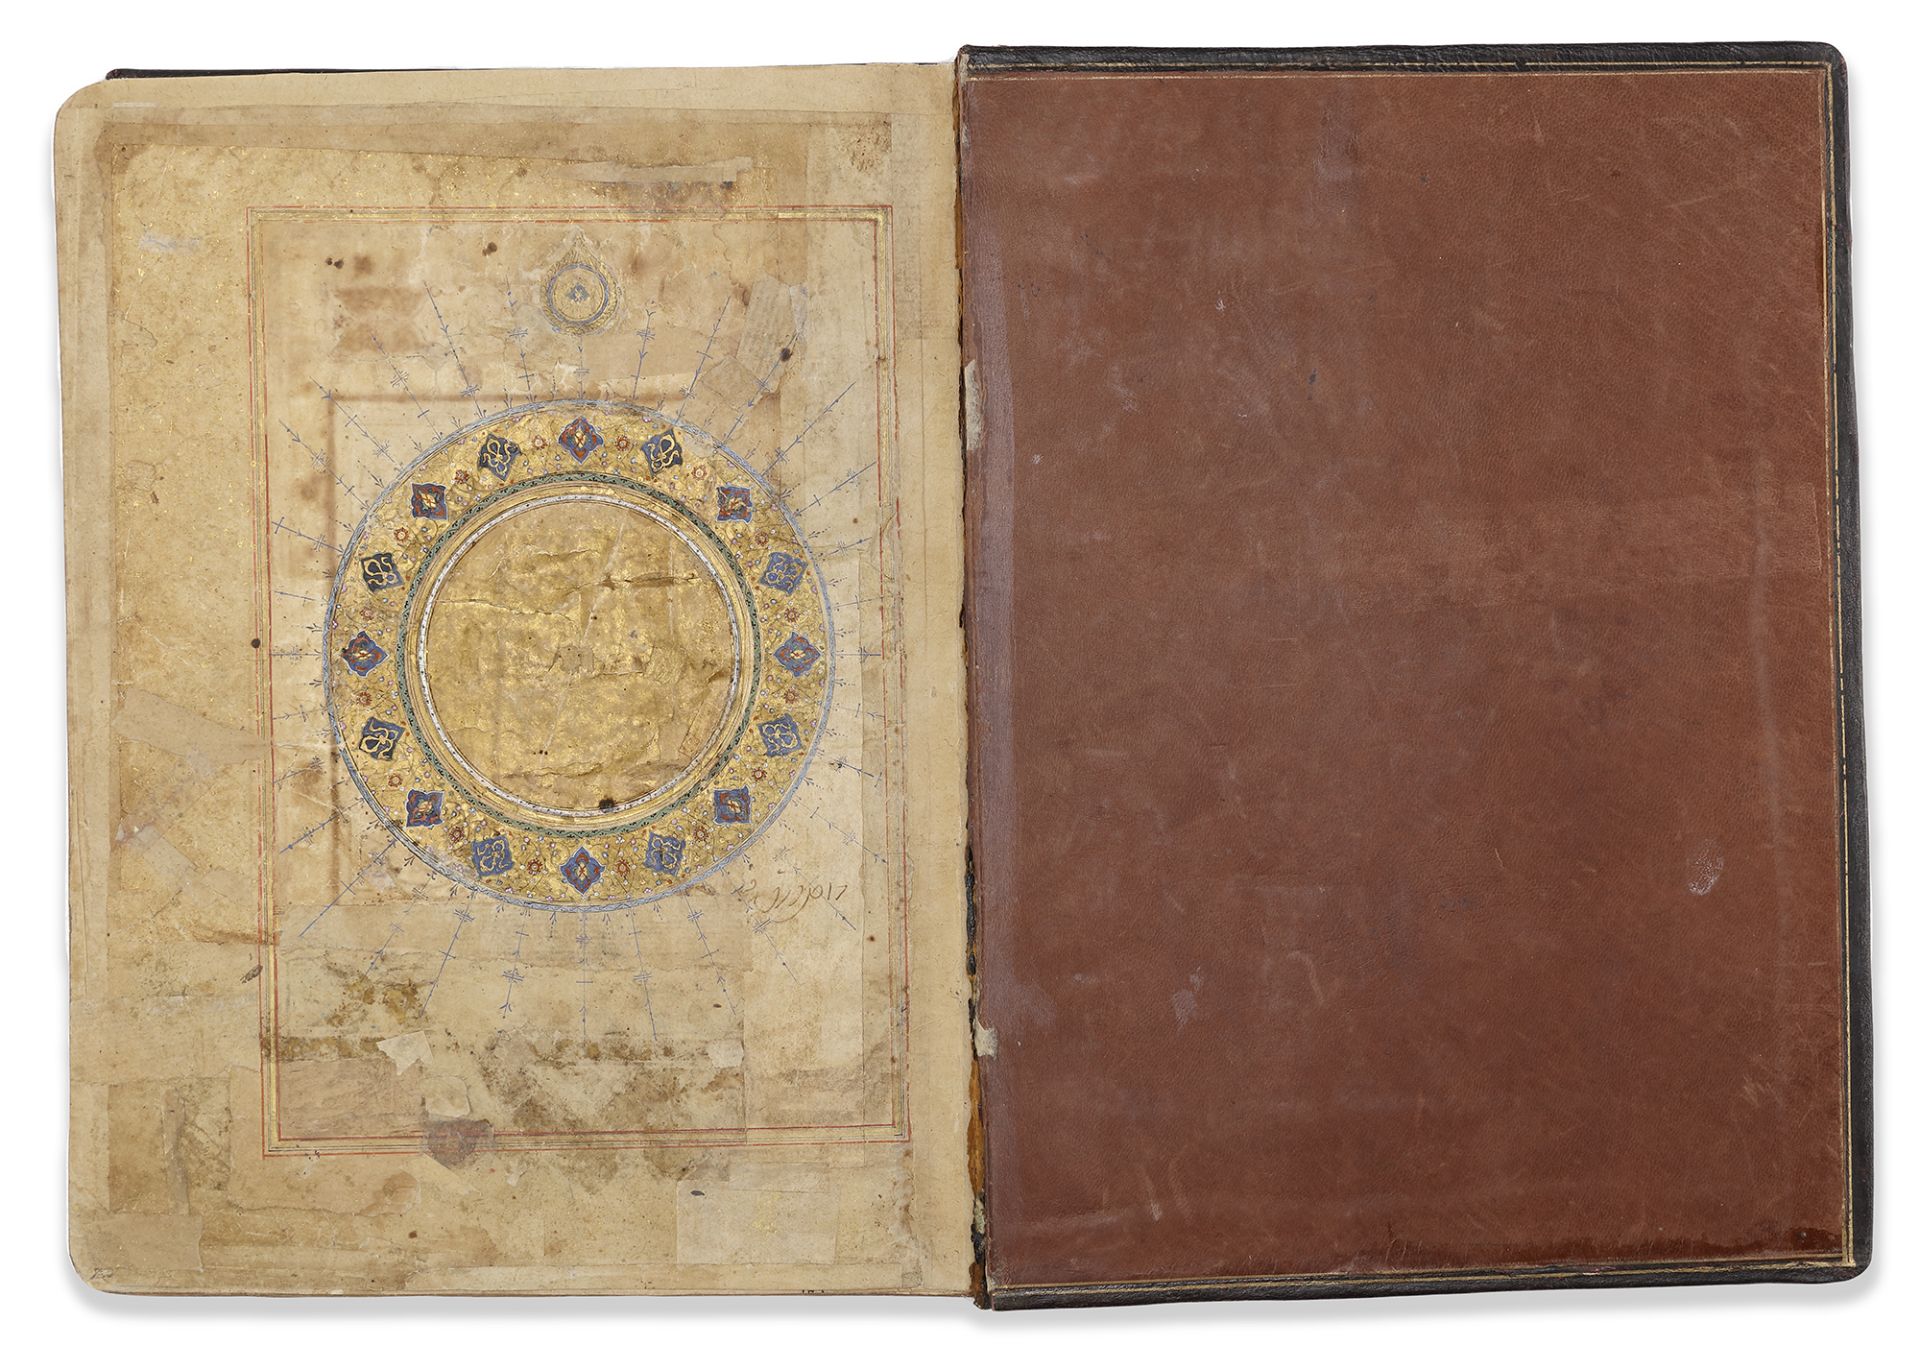 A QURAN ILKHANID AND MUGHAL INDIA, 14TH-17TH CENTURY - Image 3 of 6